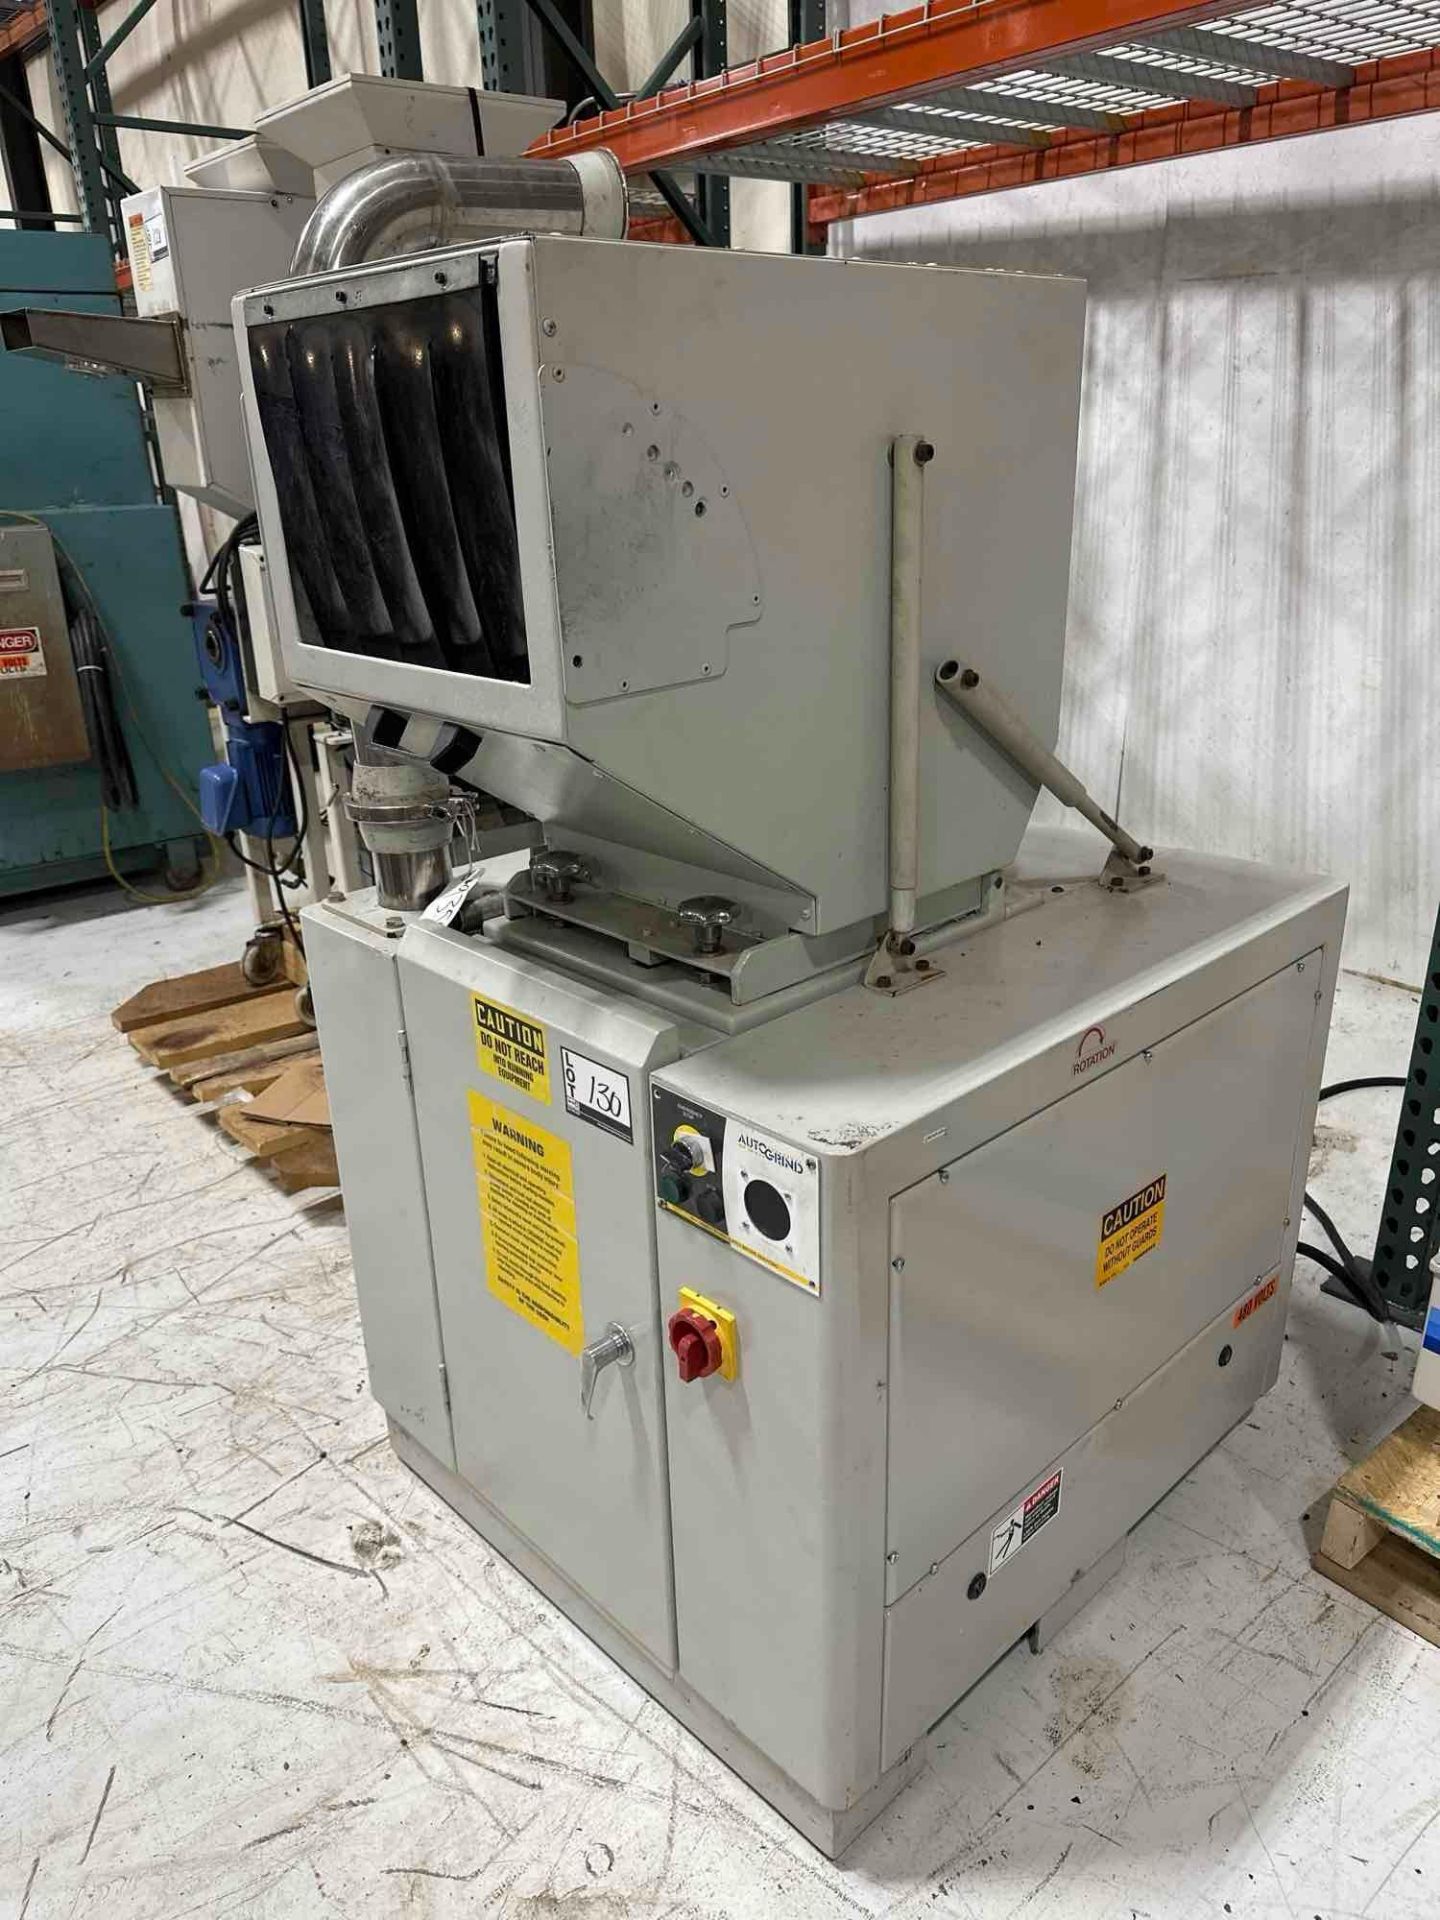 Auto Grind SG-2336 Granulator, 10hp, 9" x 14" Cutting Chamber Size, 3 Rotating Blades - Image 3 of 5